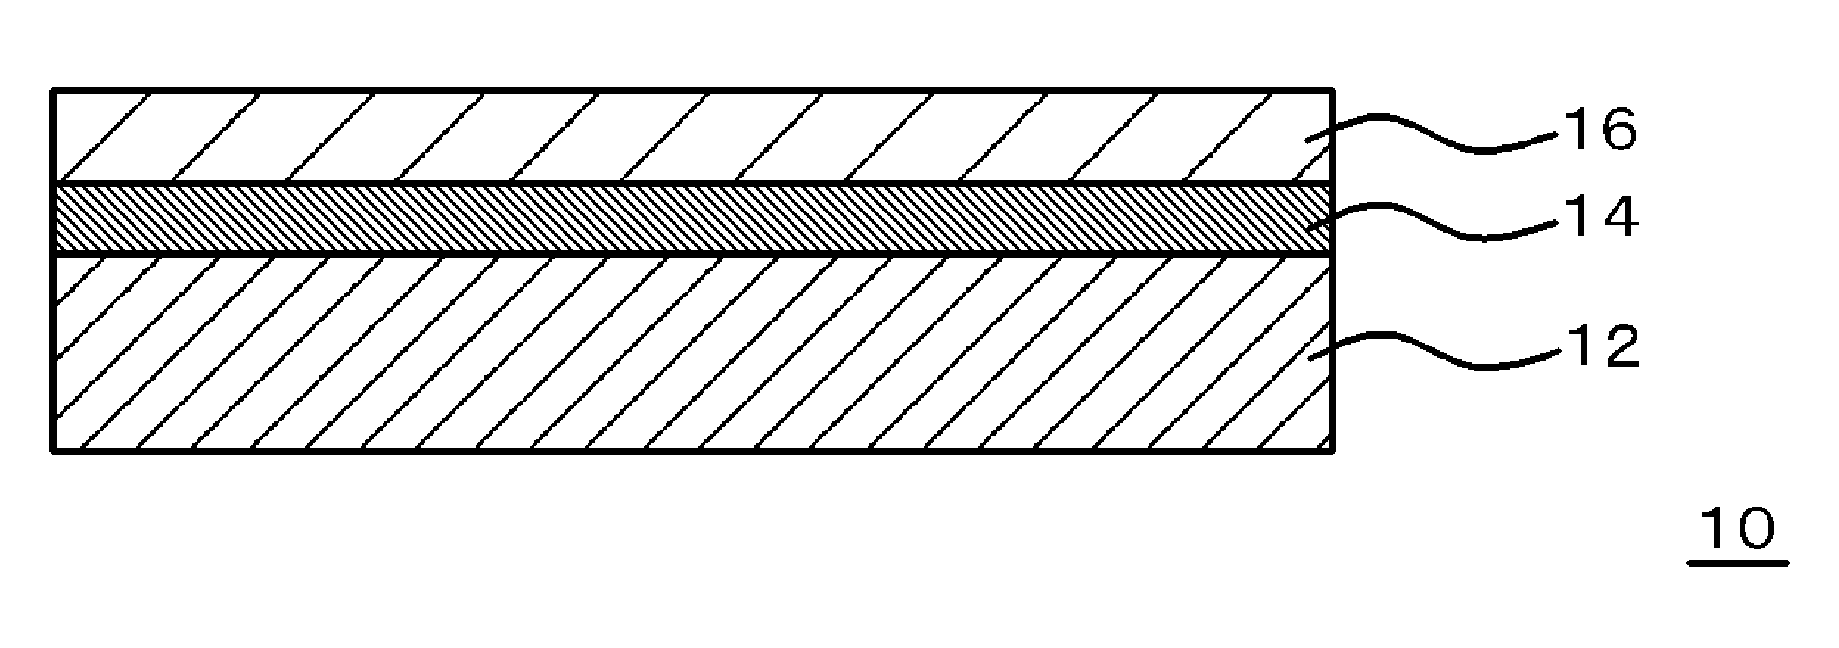 Adhesive resin composition, laminate, and self-stripping method